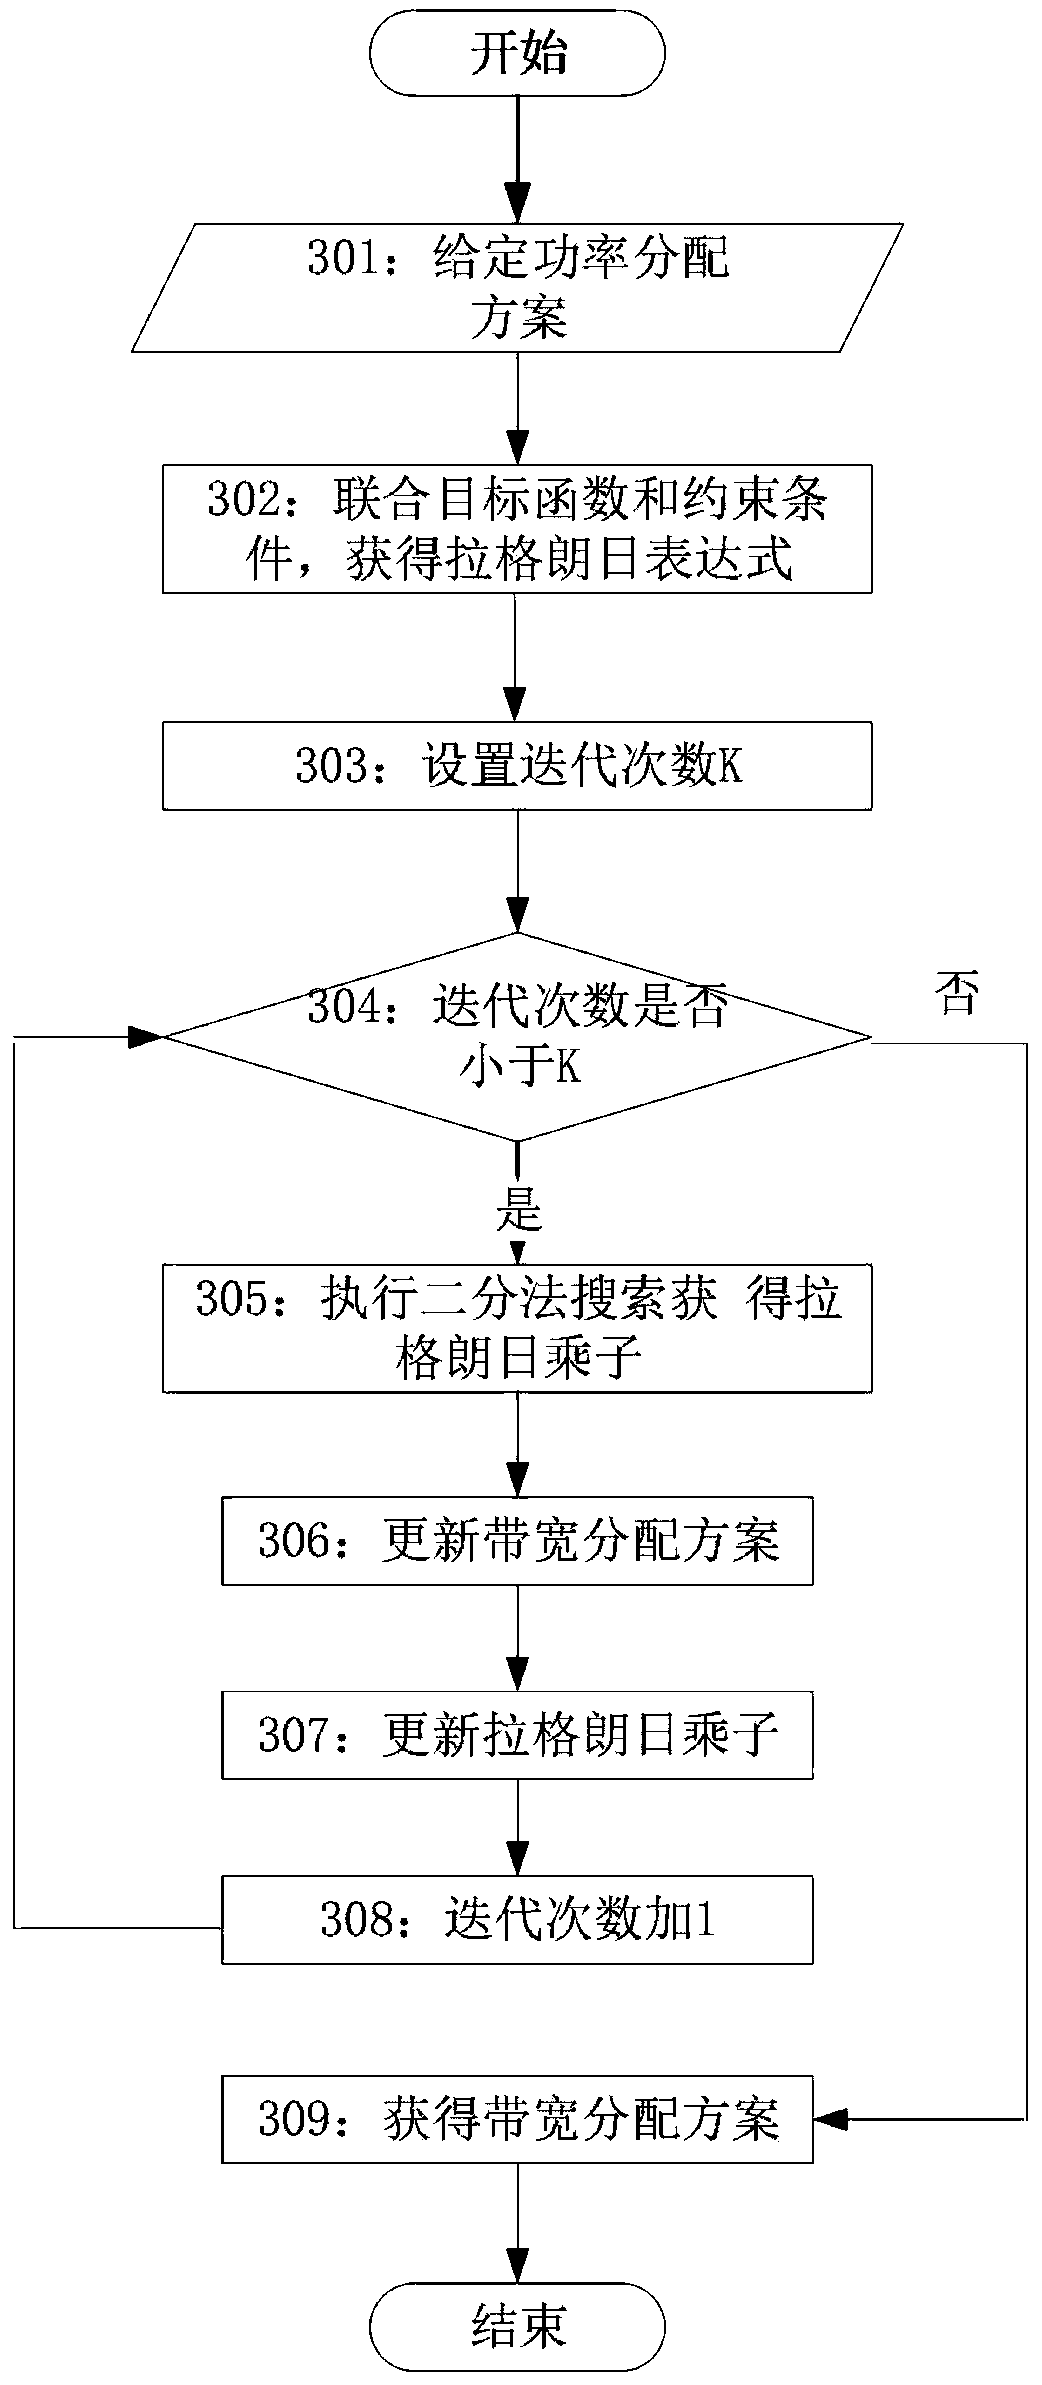 Resource allocation method for low-delay and high-reliability services in mobile edge computing